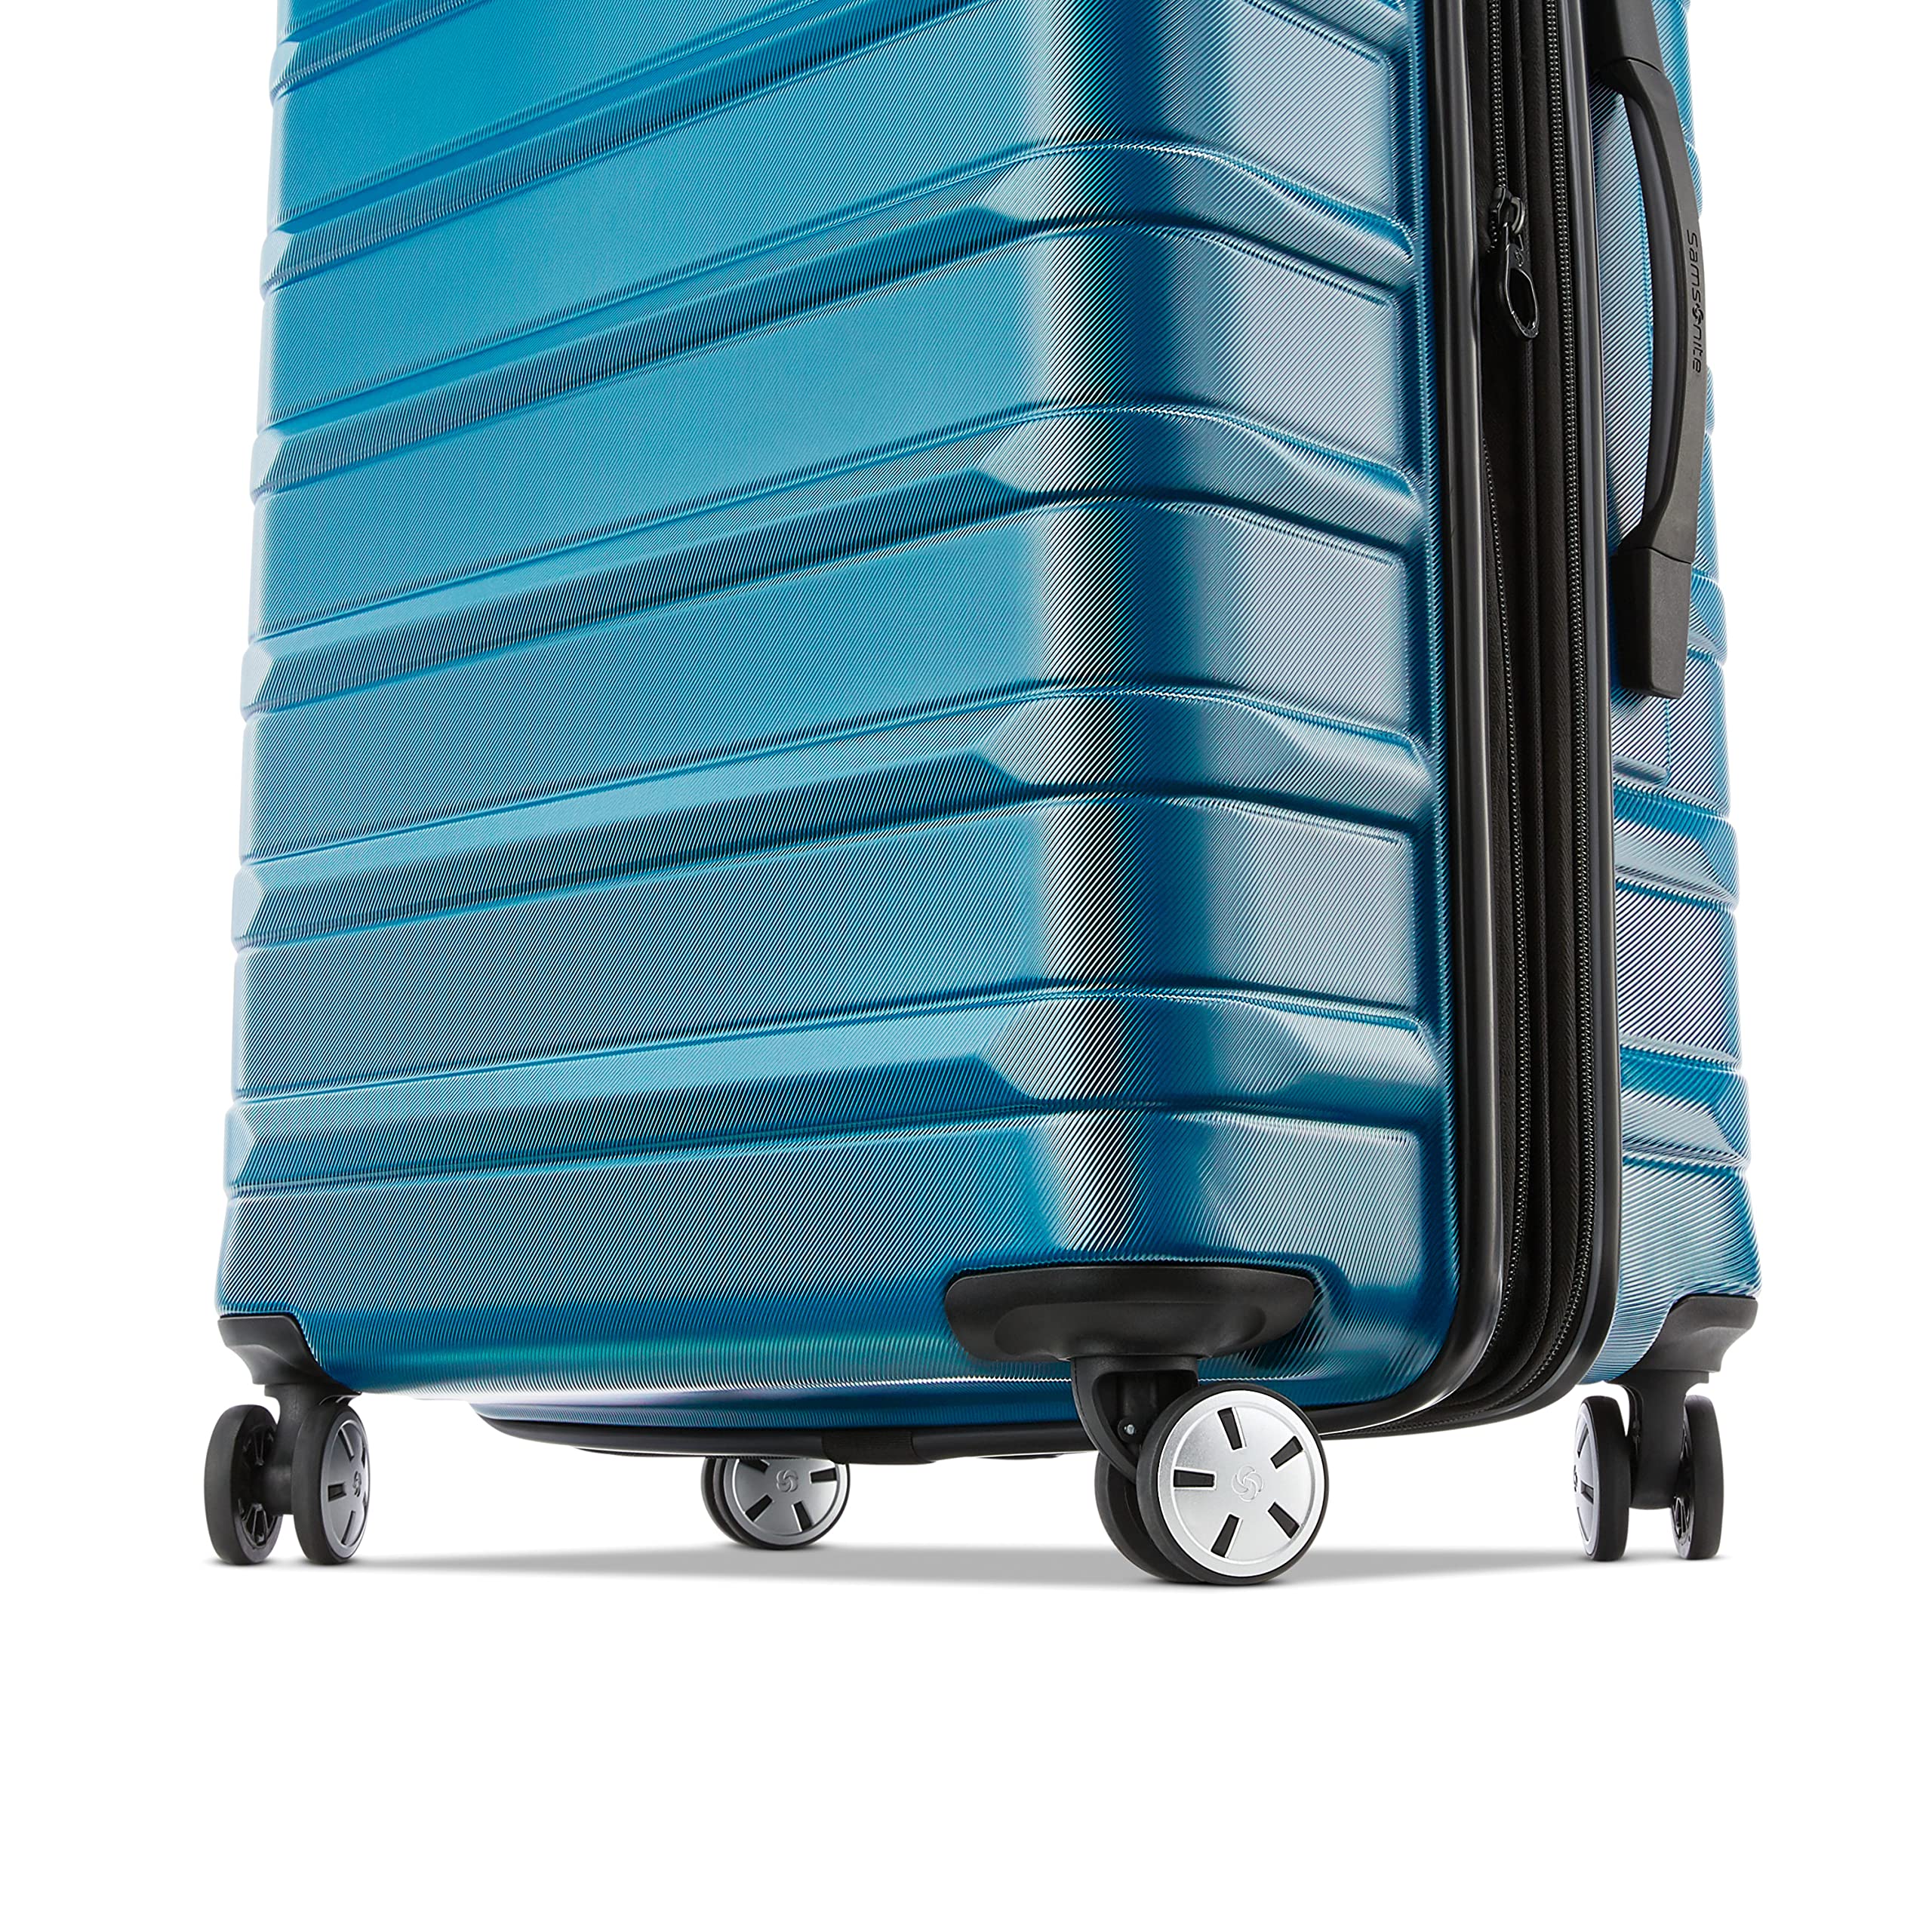 Samsonite Omni 2 Hardside Expandable Luggage with Spinners, Carry-on 20-Inch, Caribbean Blue